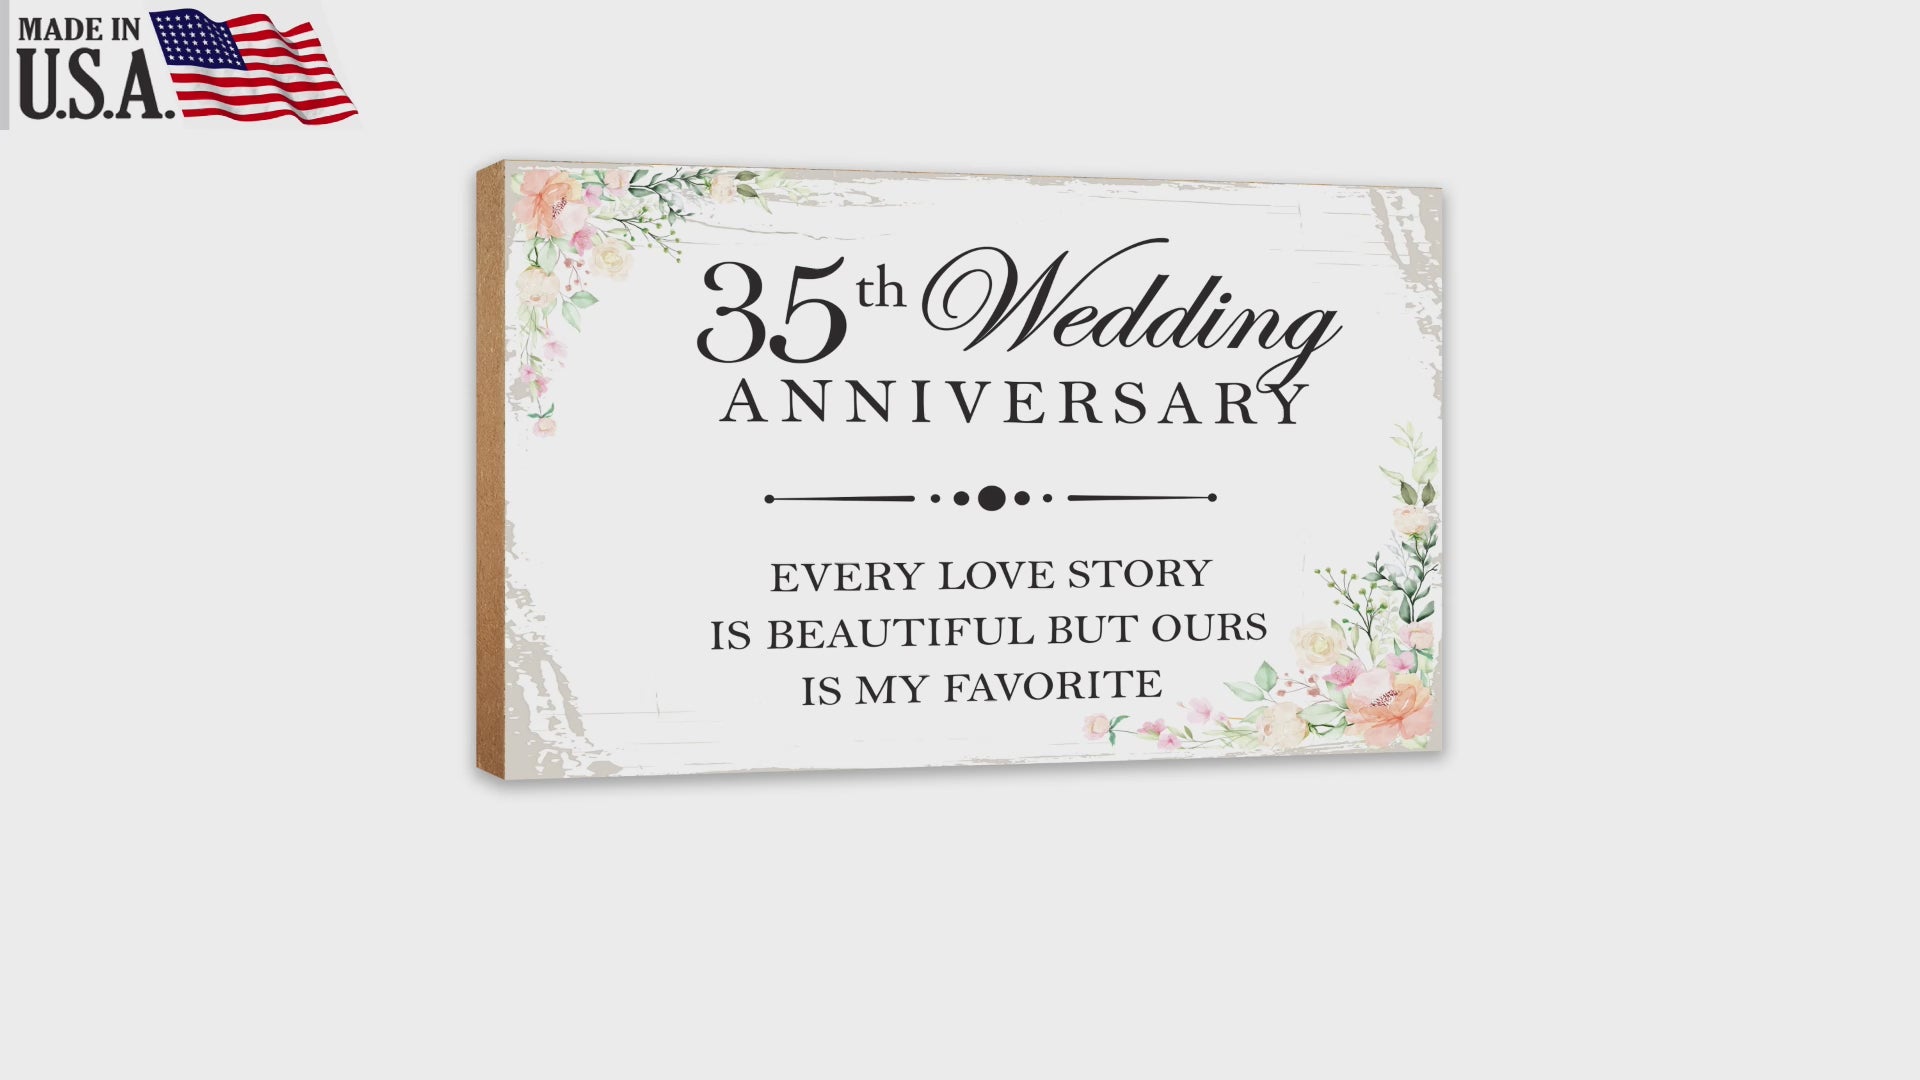 35th Wedding Anniversary Unique Shelf Decor and Tabletop Signs Gift for Couples - Every Love Story